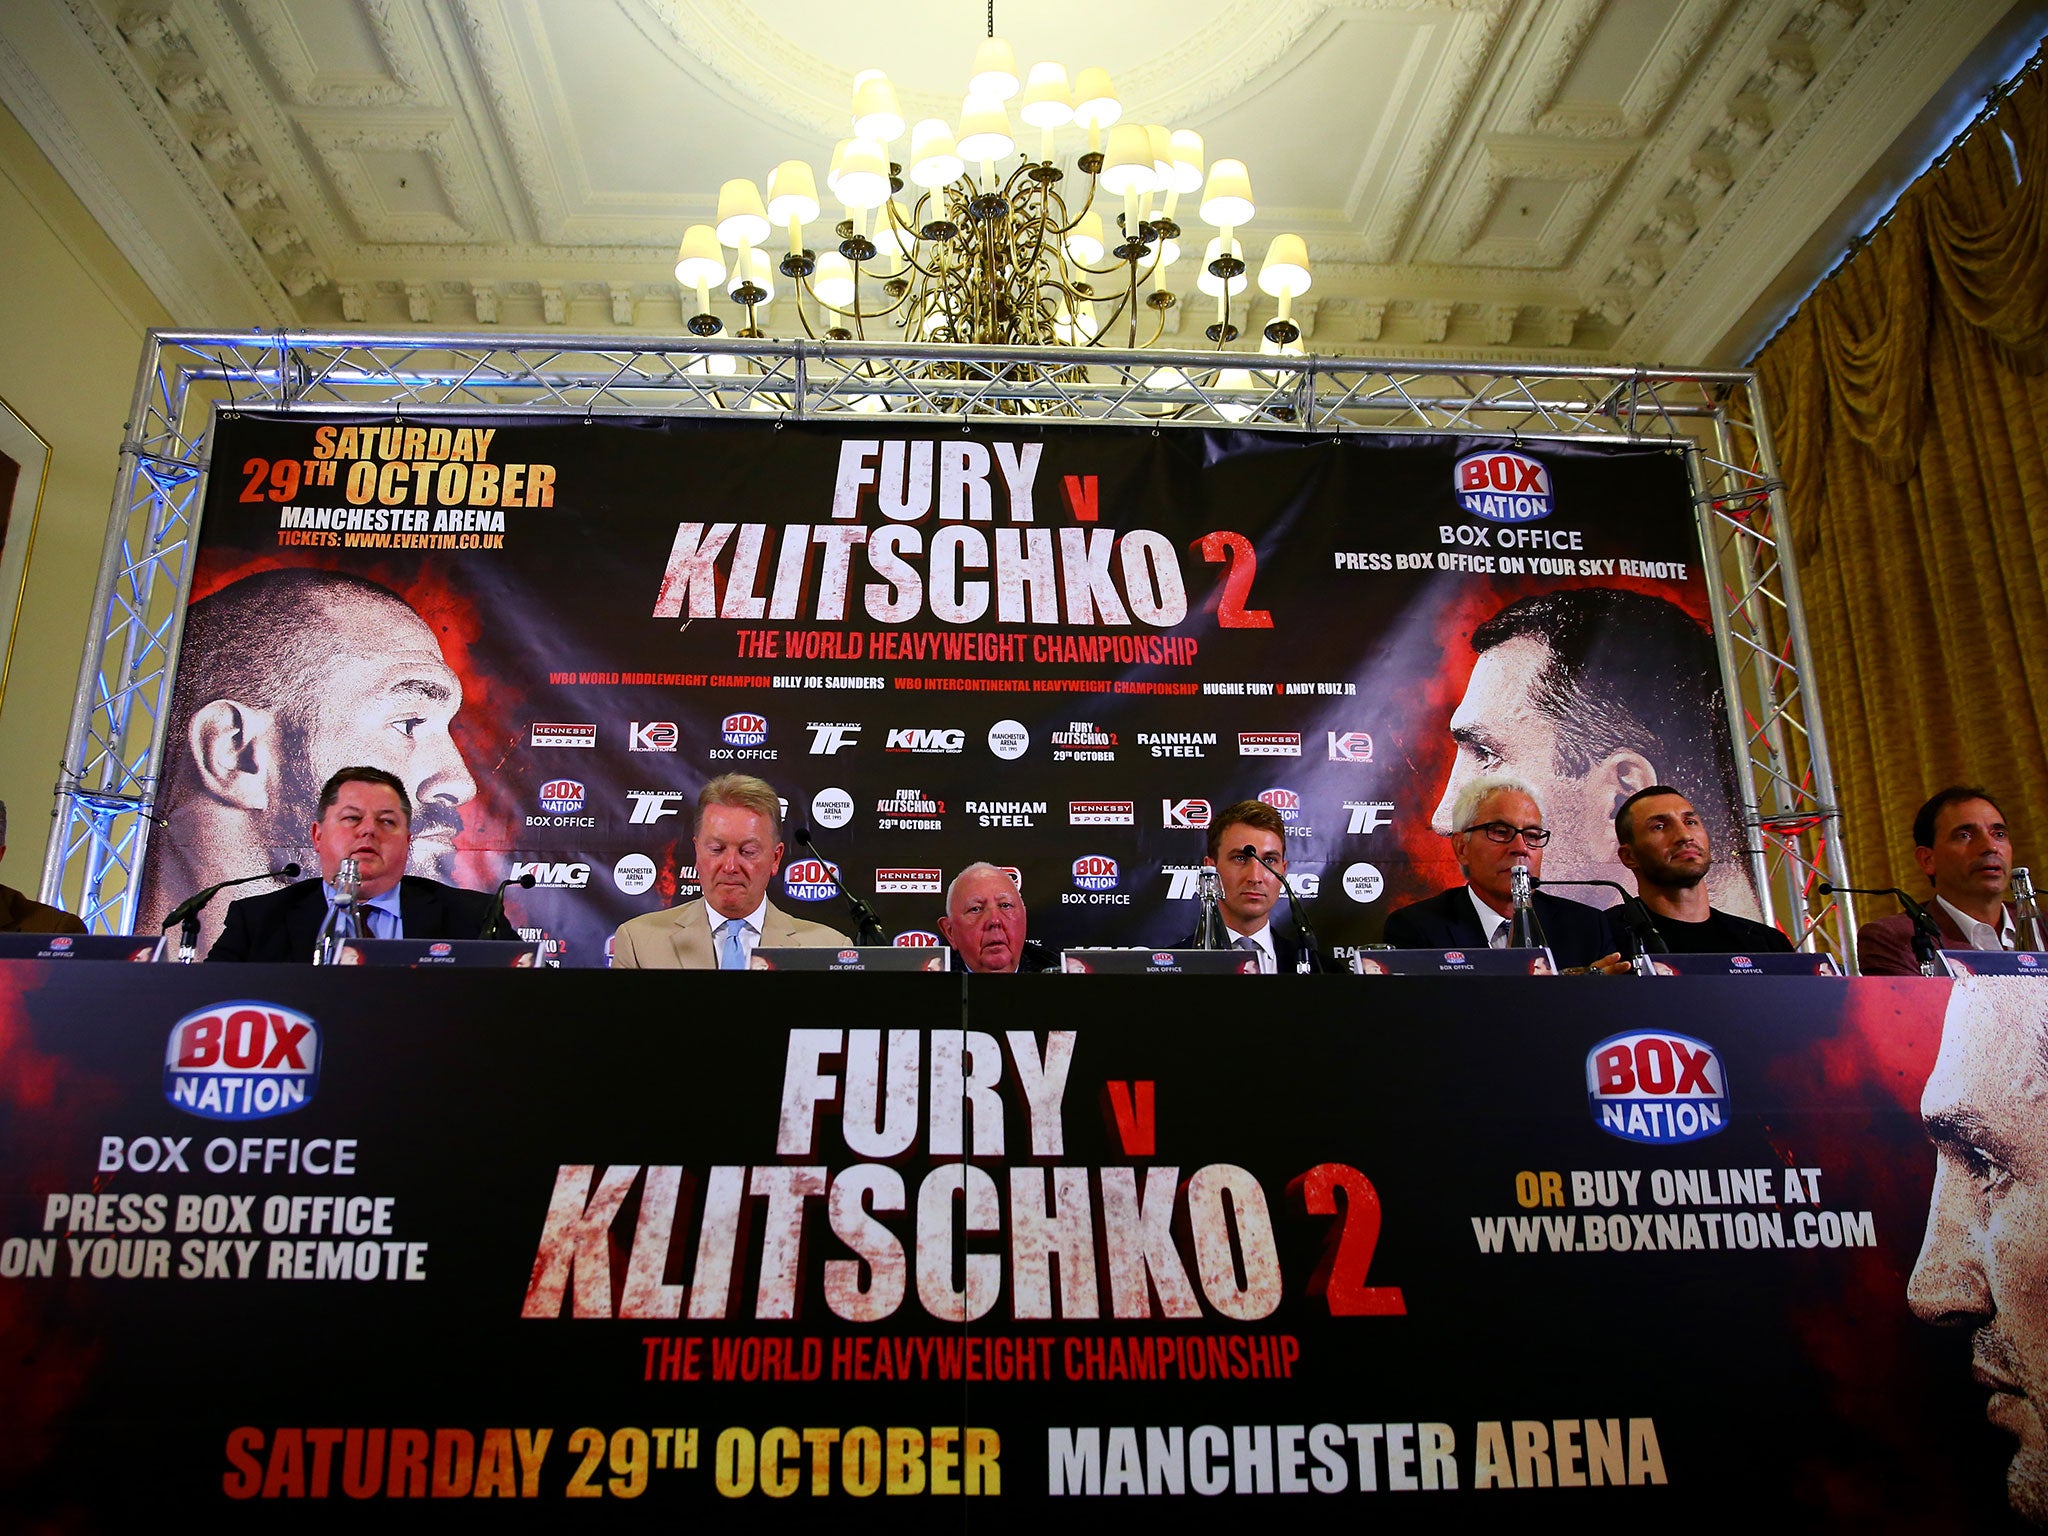 &#13;
Fury failed to show at the press conference &#13;